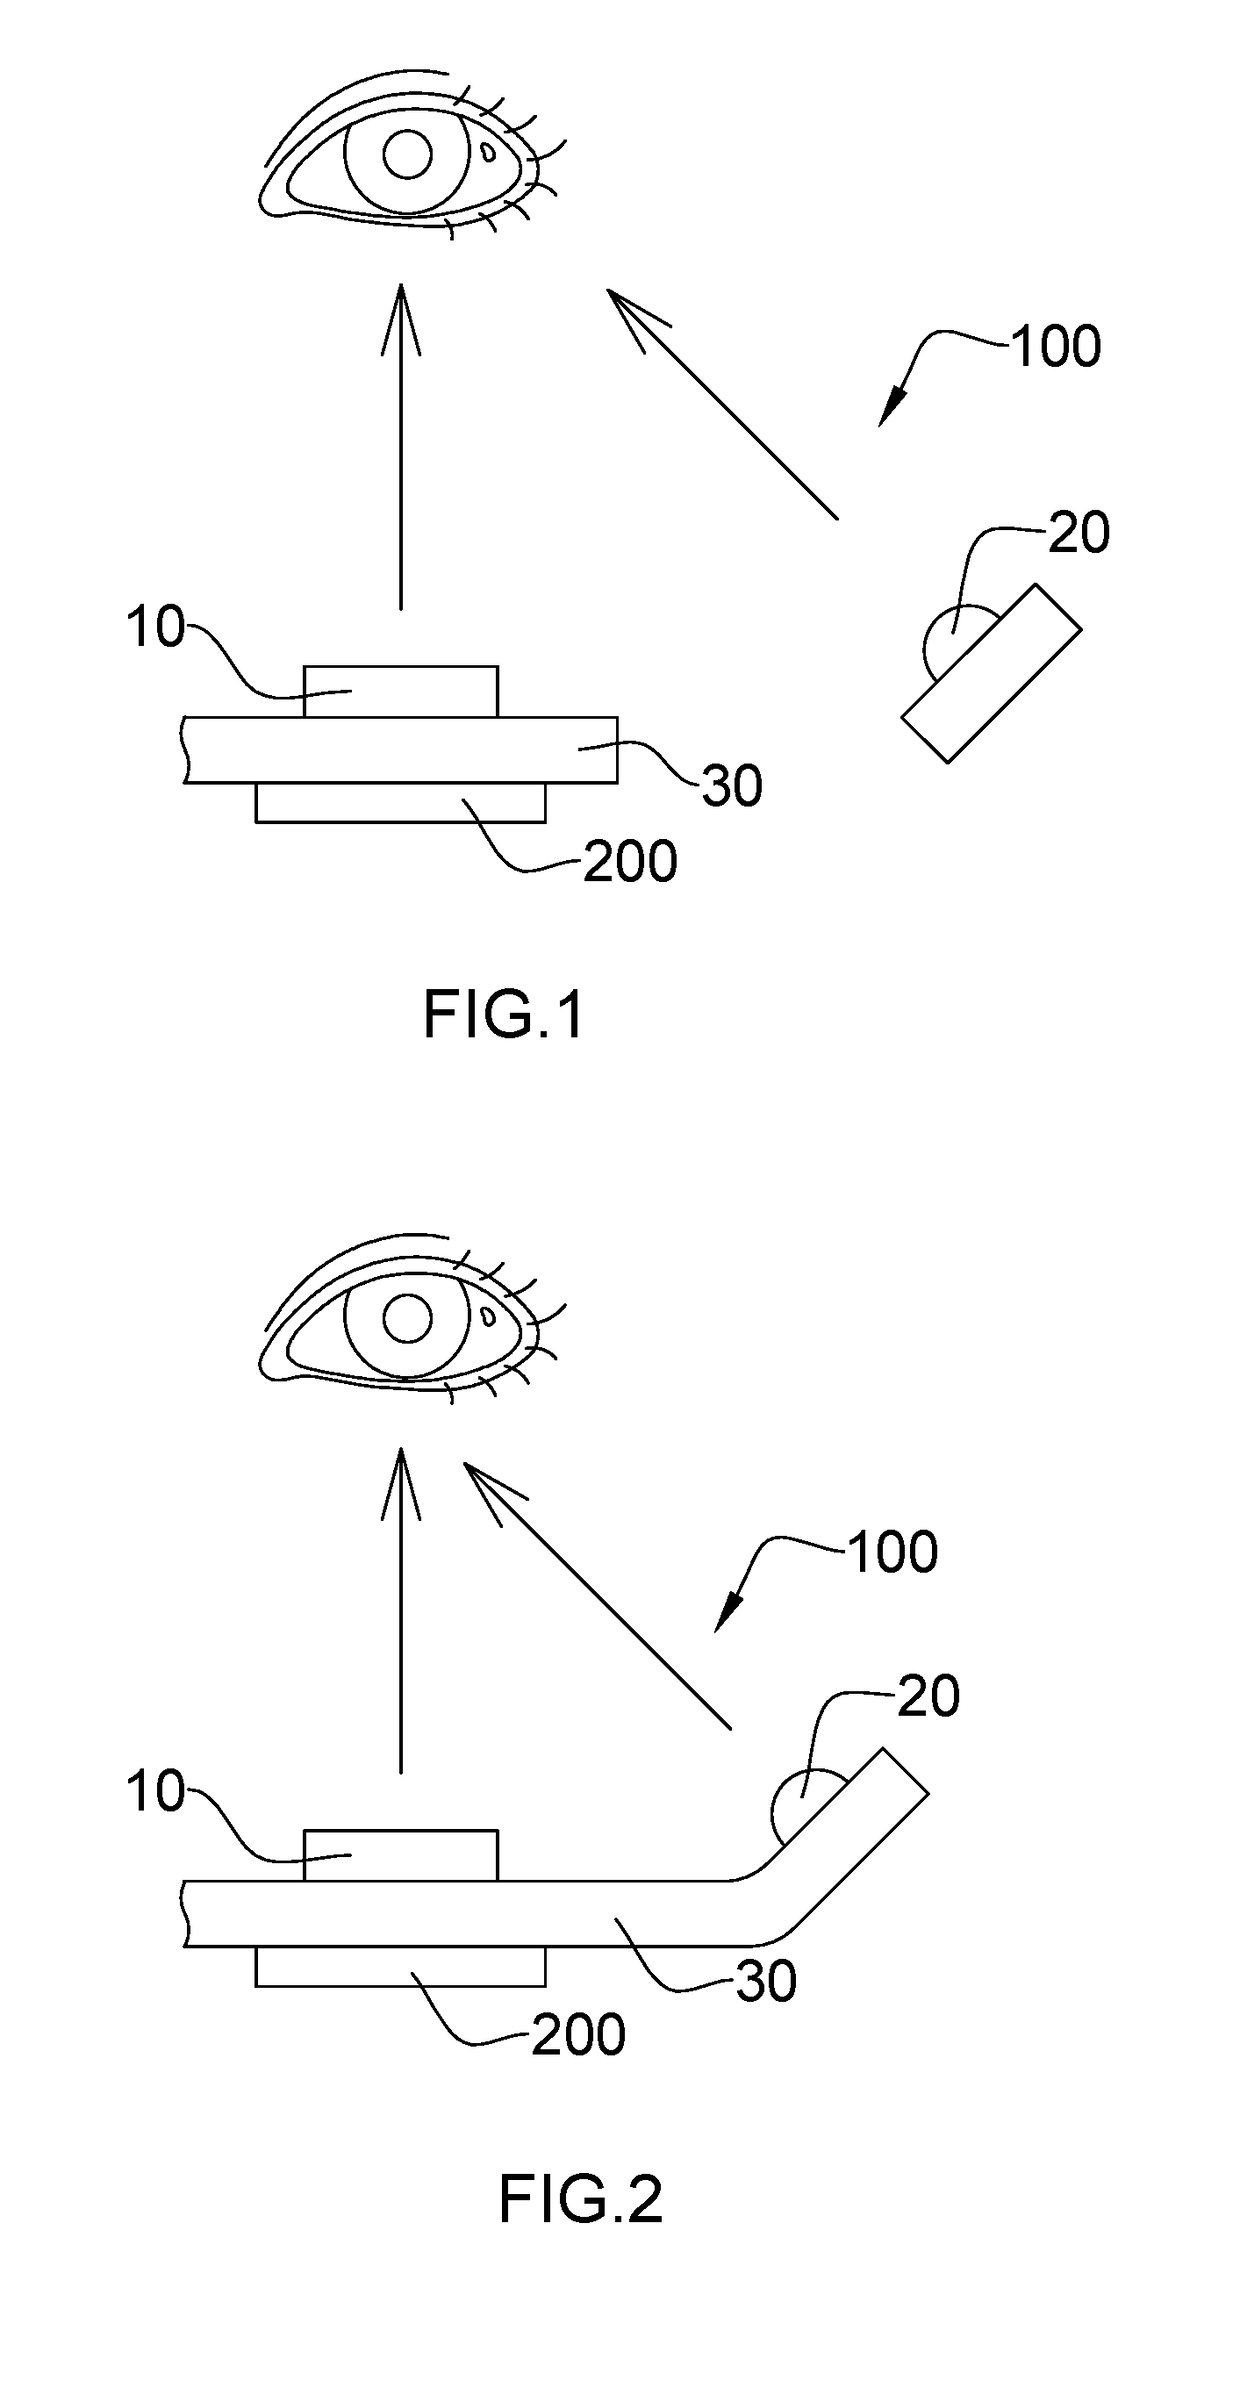 Iris recognition device, manufacturing method therefor and application thereof